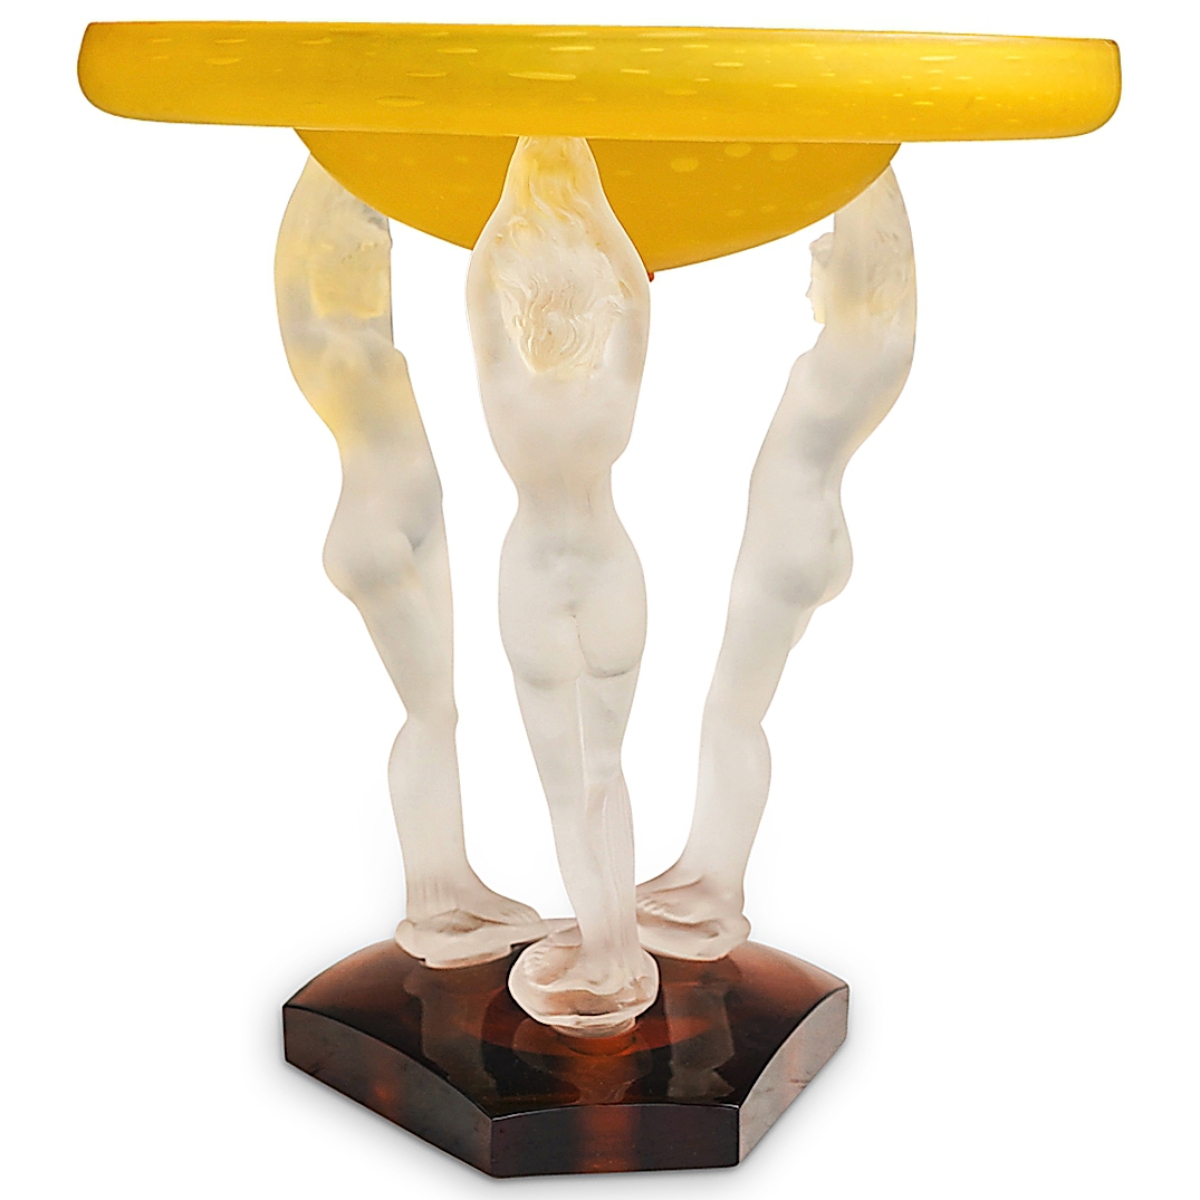 Perhaps one of only three known examples, a figural centerpiece bowl, Steuben’s “Diving Lady,” circa 1926, was bid to $16,250. Three frosted nude figures support a bright yellow bowl.